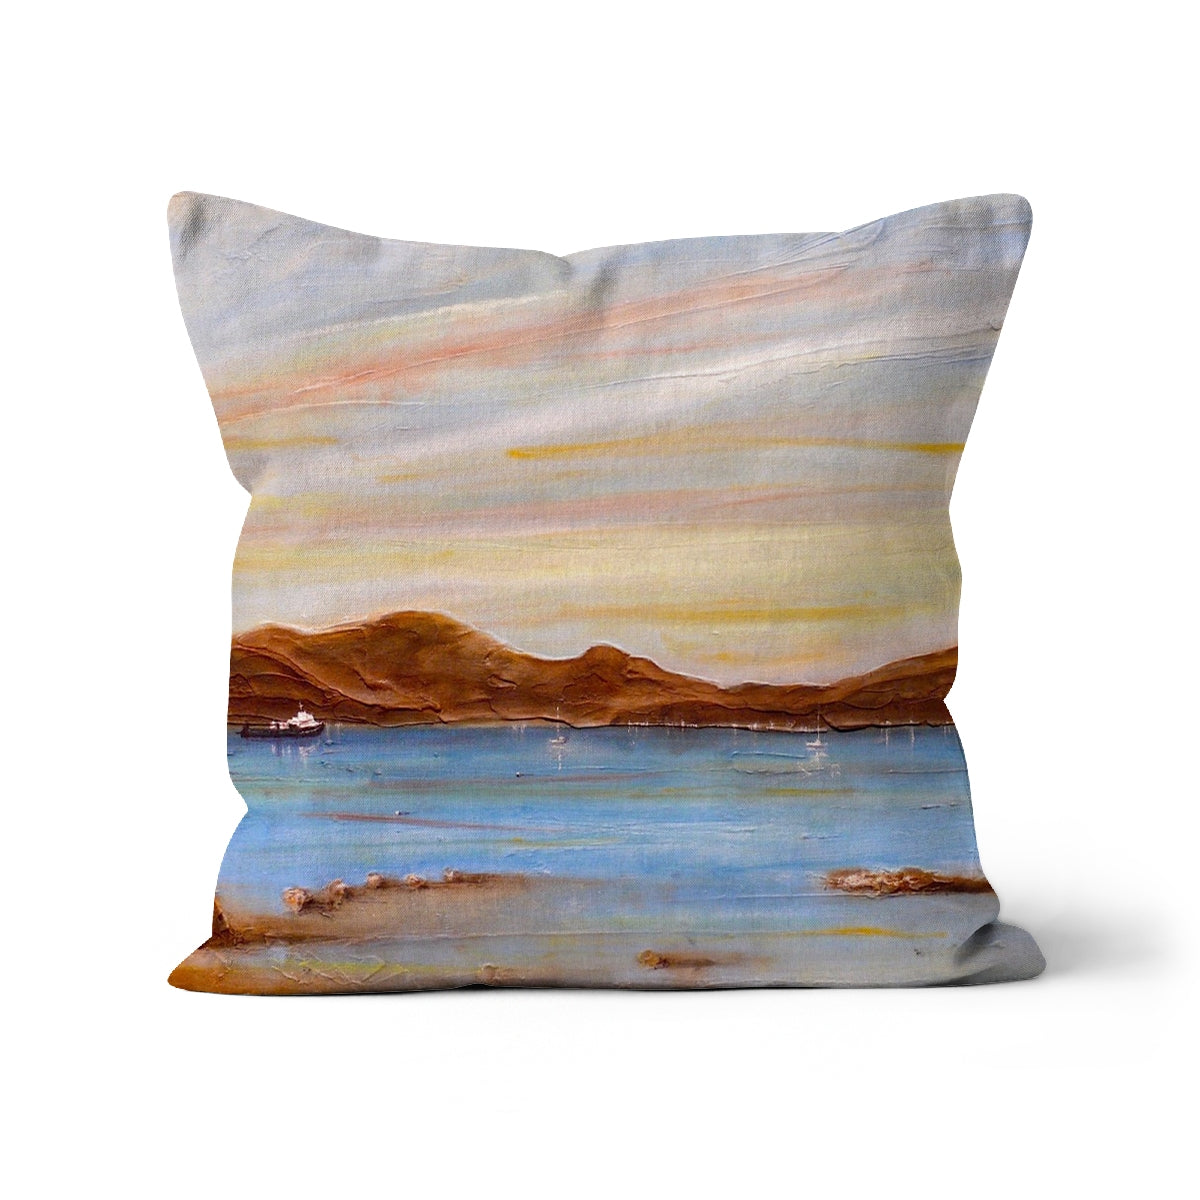 The Last Ferry To Dunoon Art Gifts Cushion-Cushions-River Clyde Art Gallery-Faux Suede-22"x22"-Paintings, Prints, Homeware, Art Gifts From Scotland By Scottish Artist Kevin Hunter